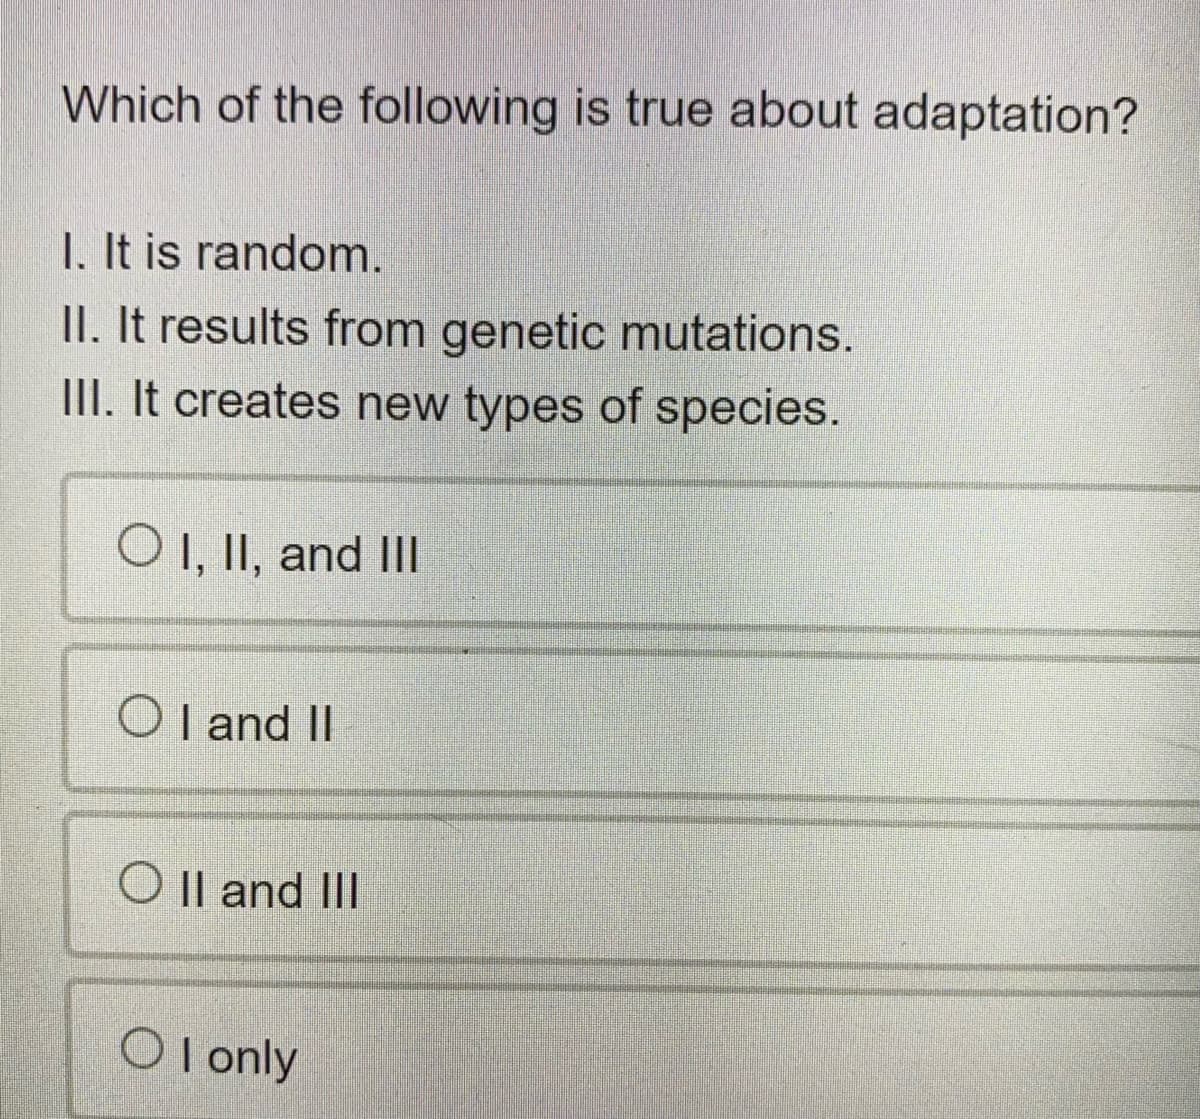 Which of the following is true about adaptation?
1. It is random.
II. It results from genetic mutations.
II. It creates new types of species.
O 1, II, and II
O I and II
O Il and III
O l only
